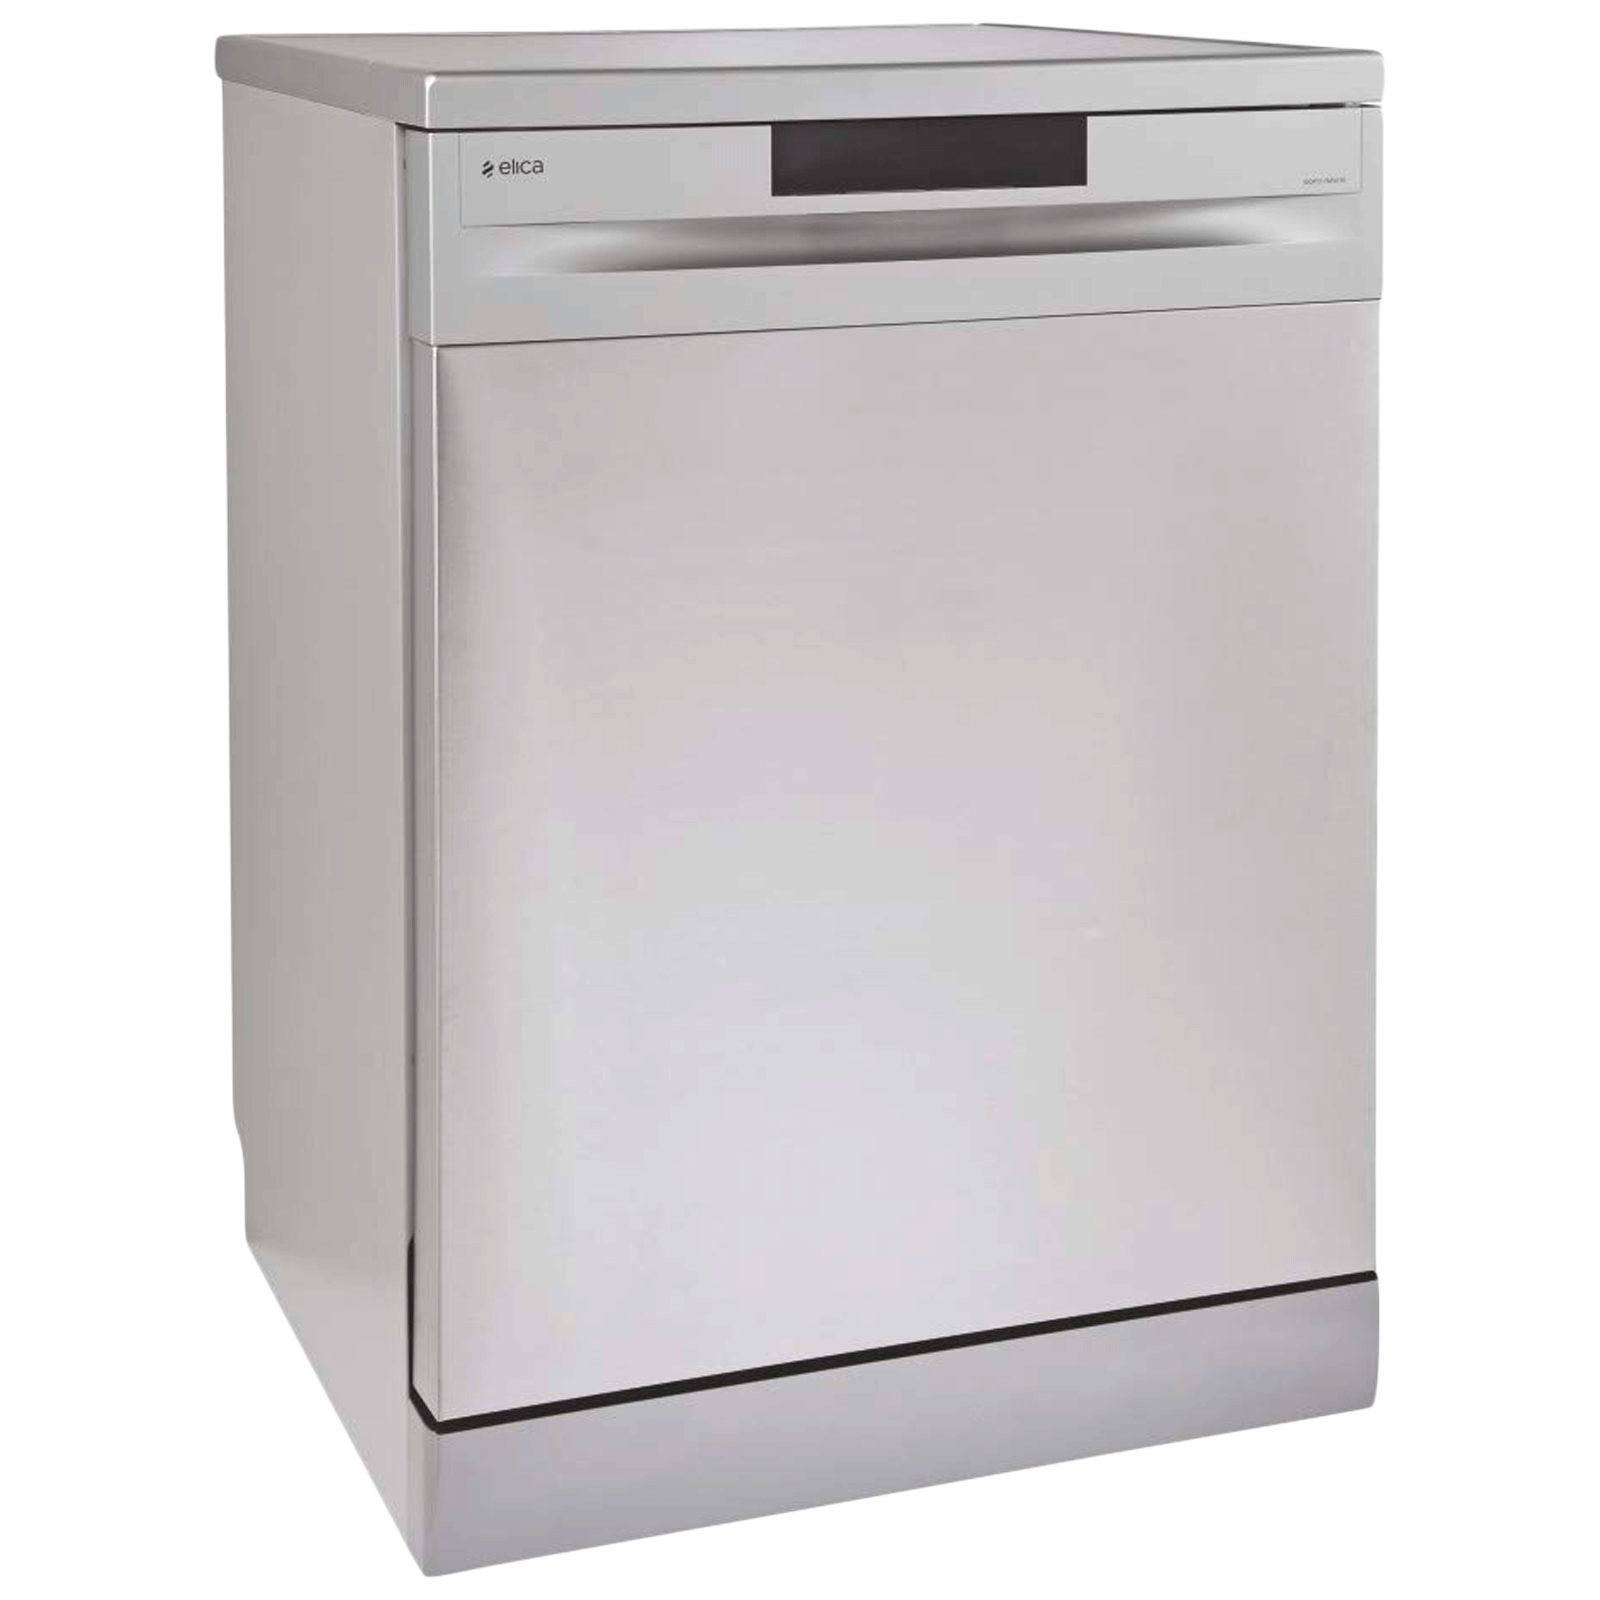 Elica 12 Place Setting Freestanding Dishwasher (Soft Touch Control, WQP12-7605V, White)_1